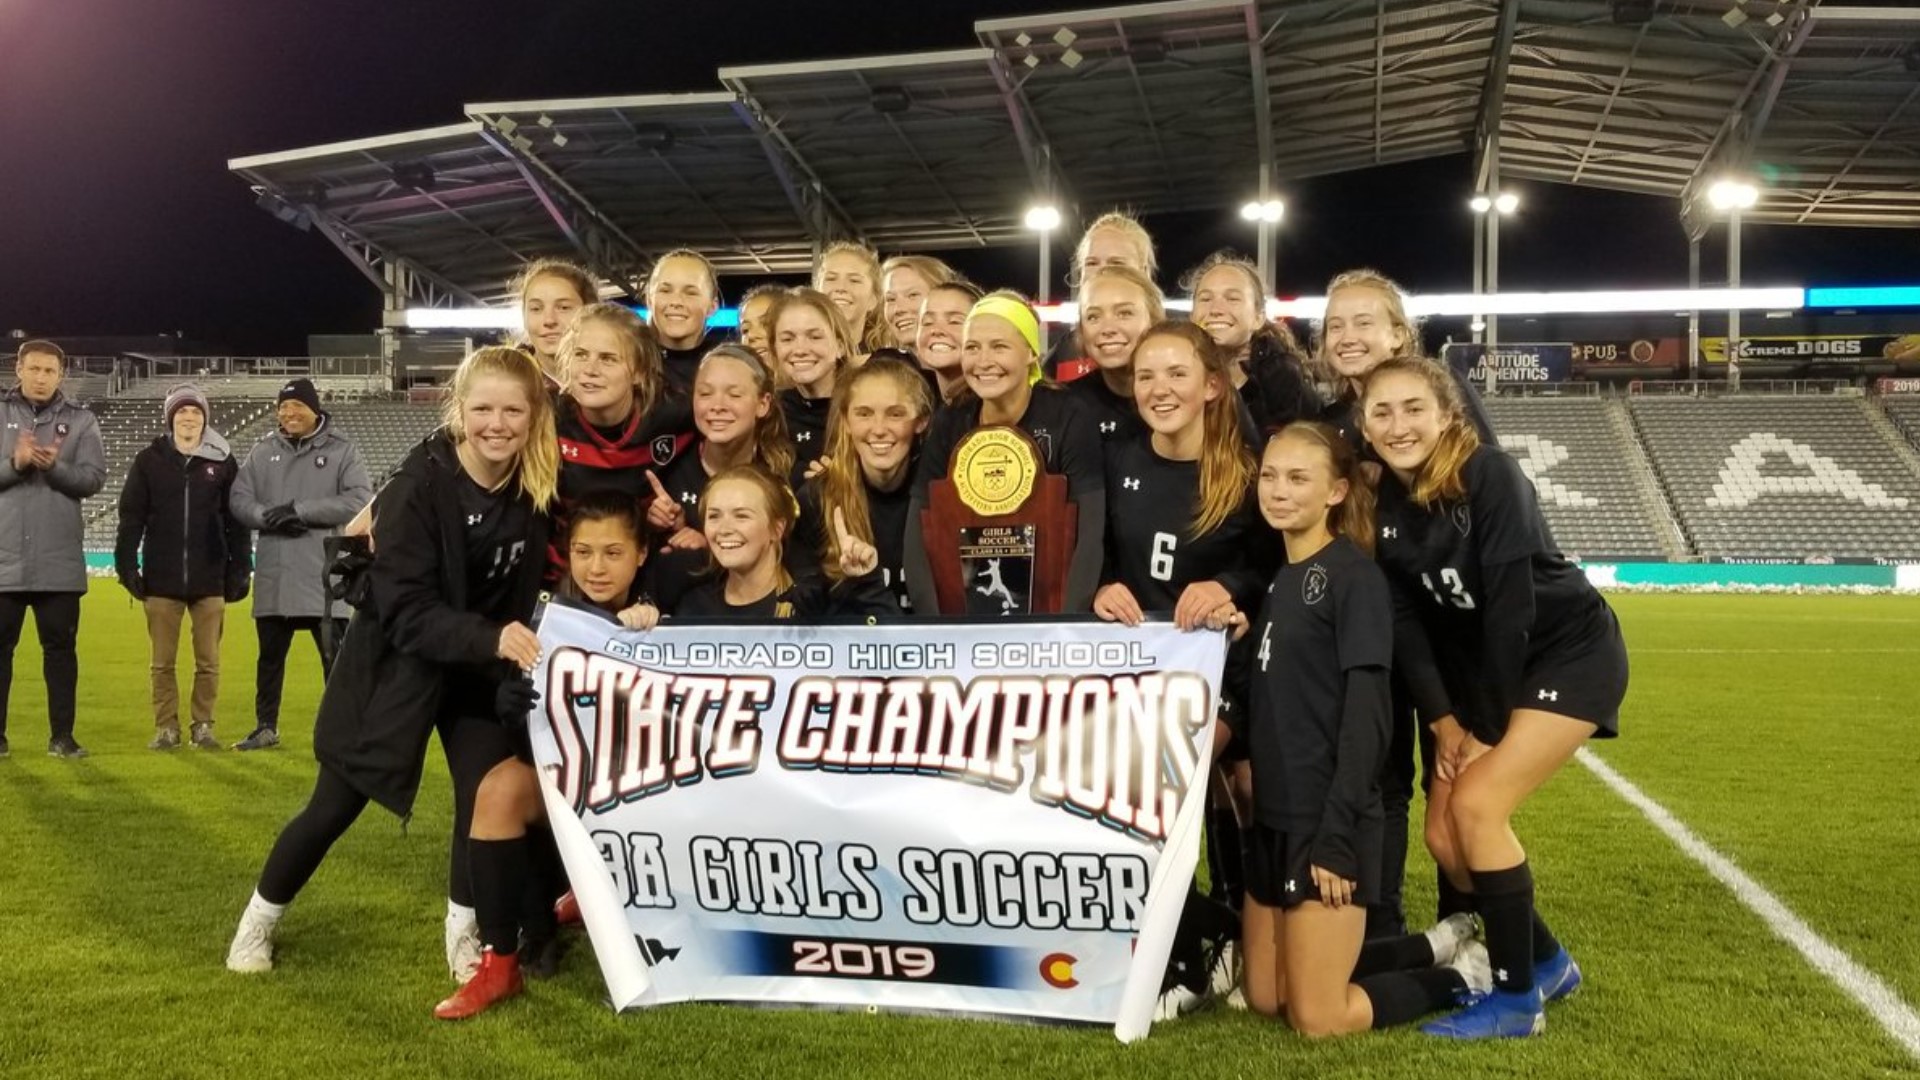 Extended highlights from the 2019 girls' soccer state title game between Colorado Academy and Jefferson Academy.